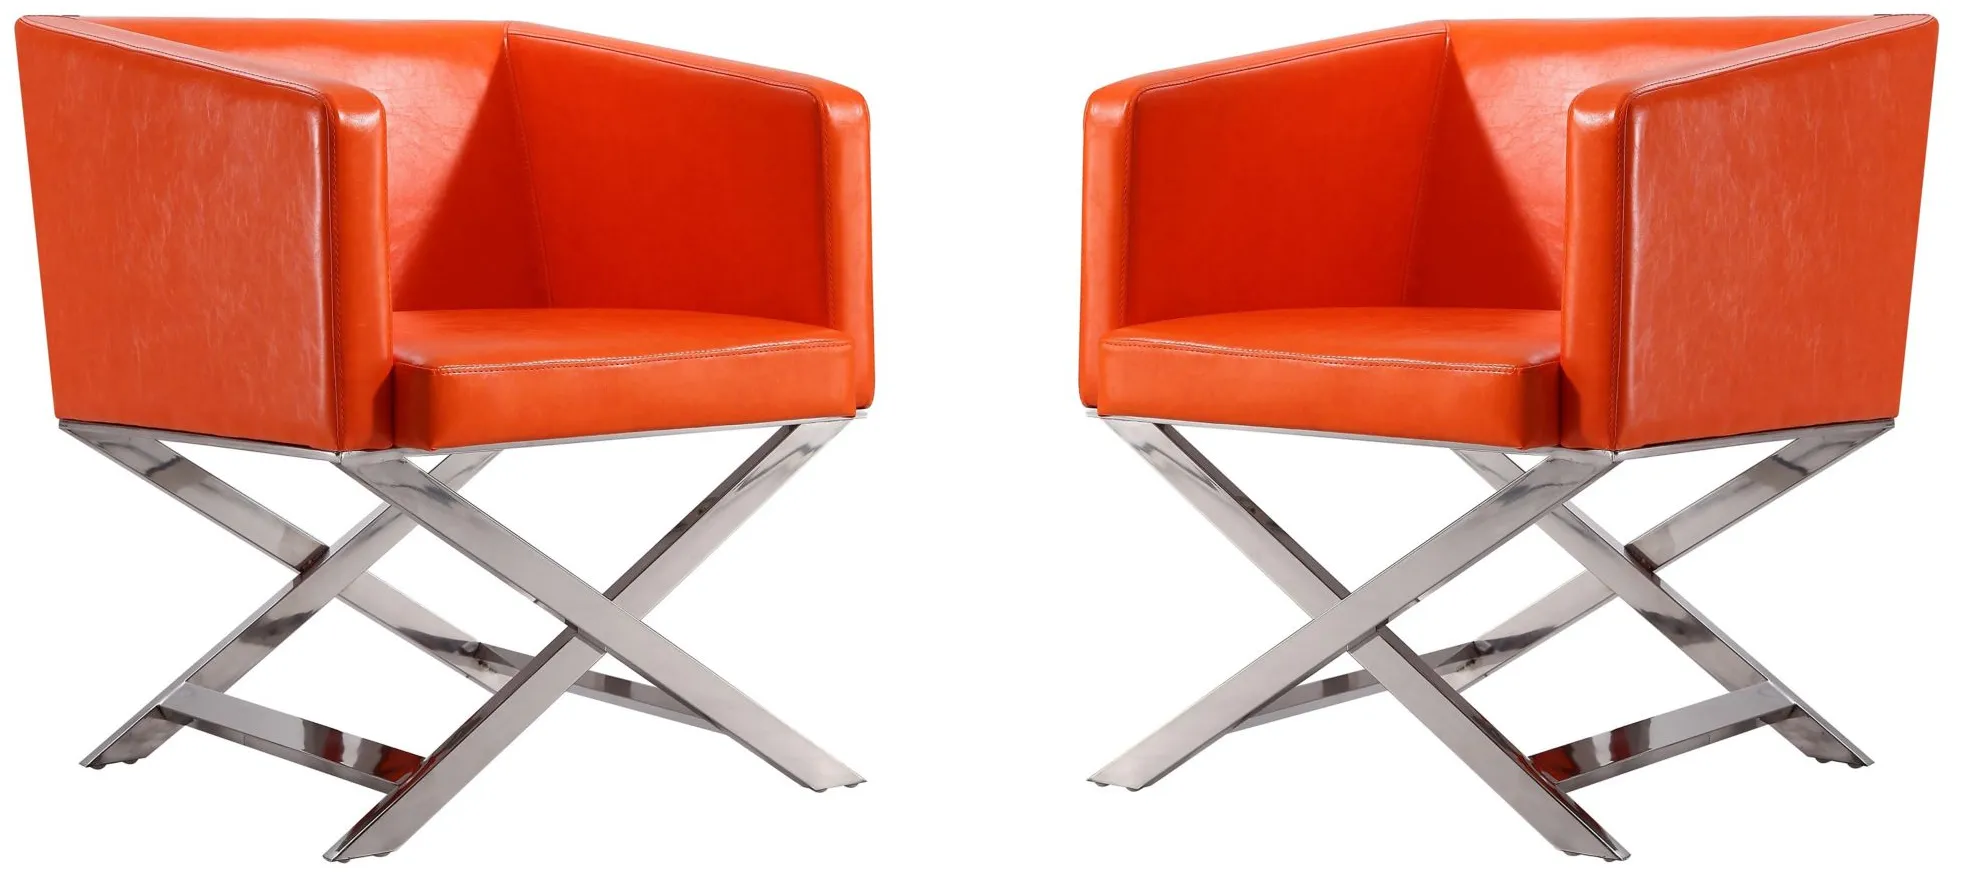 Hollywood Lounge Accent Chair (Set of 2) in Orange and Polished Chrome by Manhattan Comfort